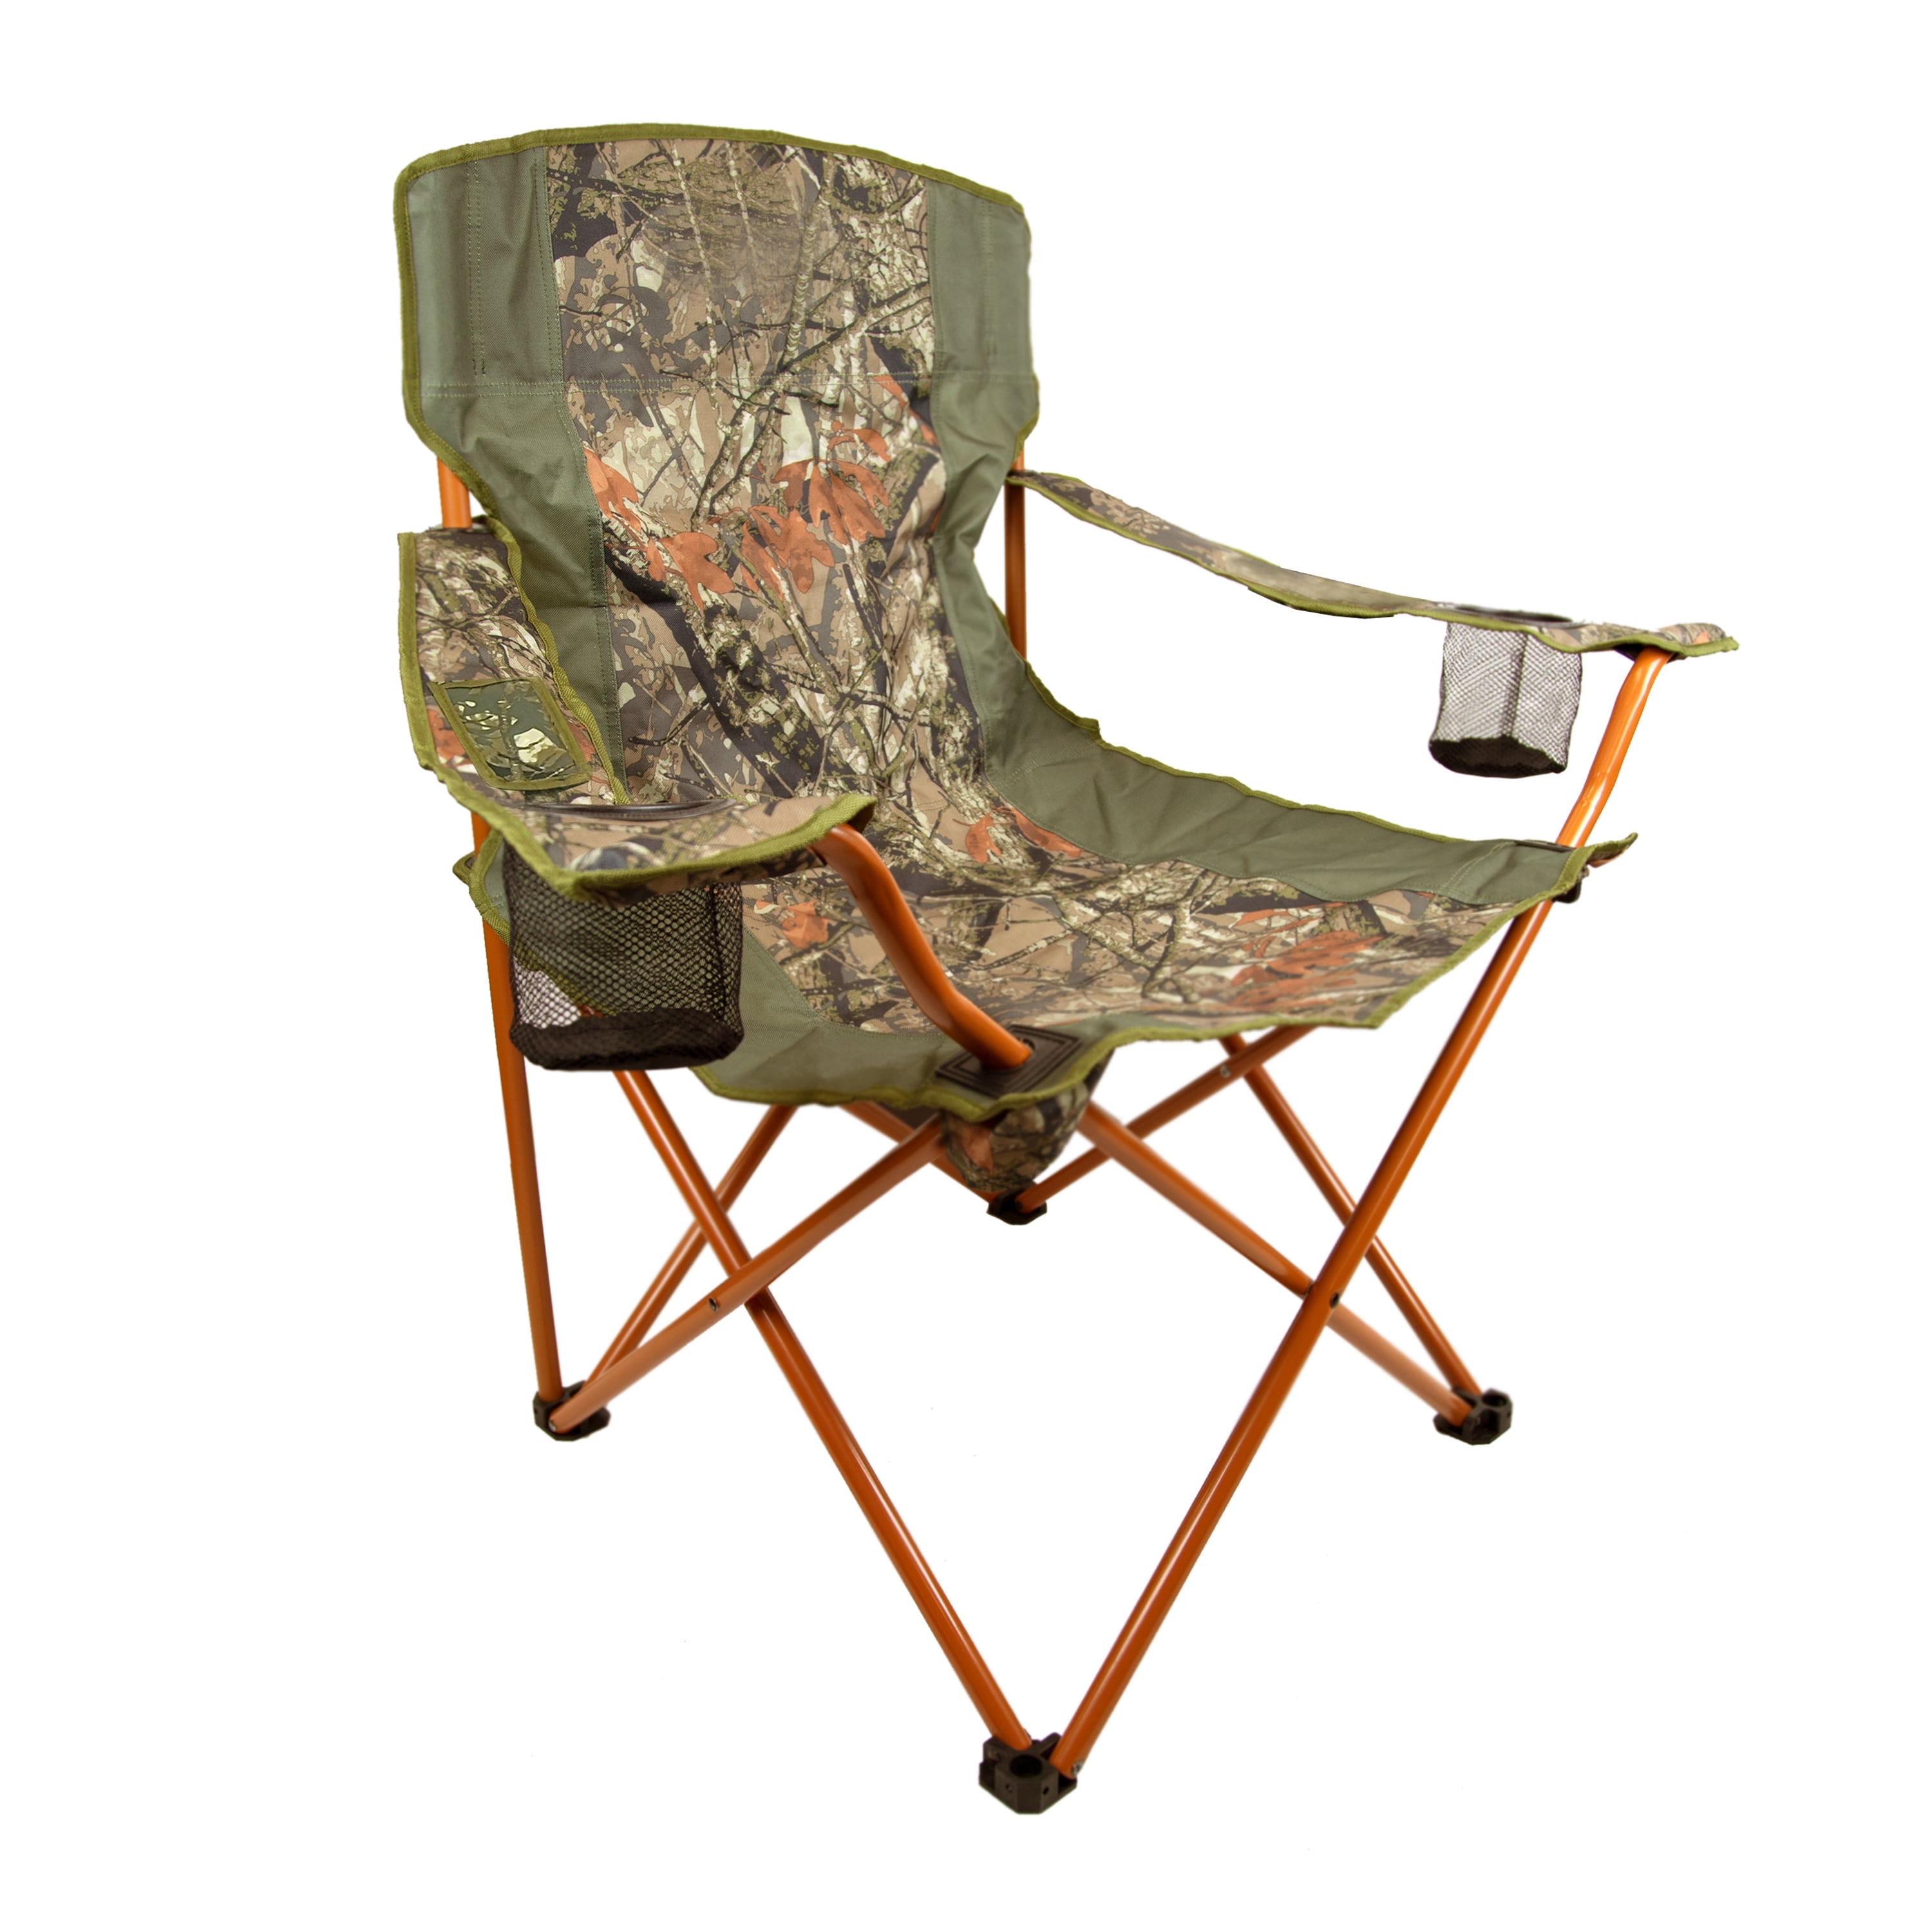 Hard Arm Camo Chair for Outdoor 26.20" W × 25.50" D × 38.20" H Dimensions New 